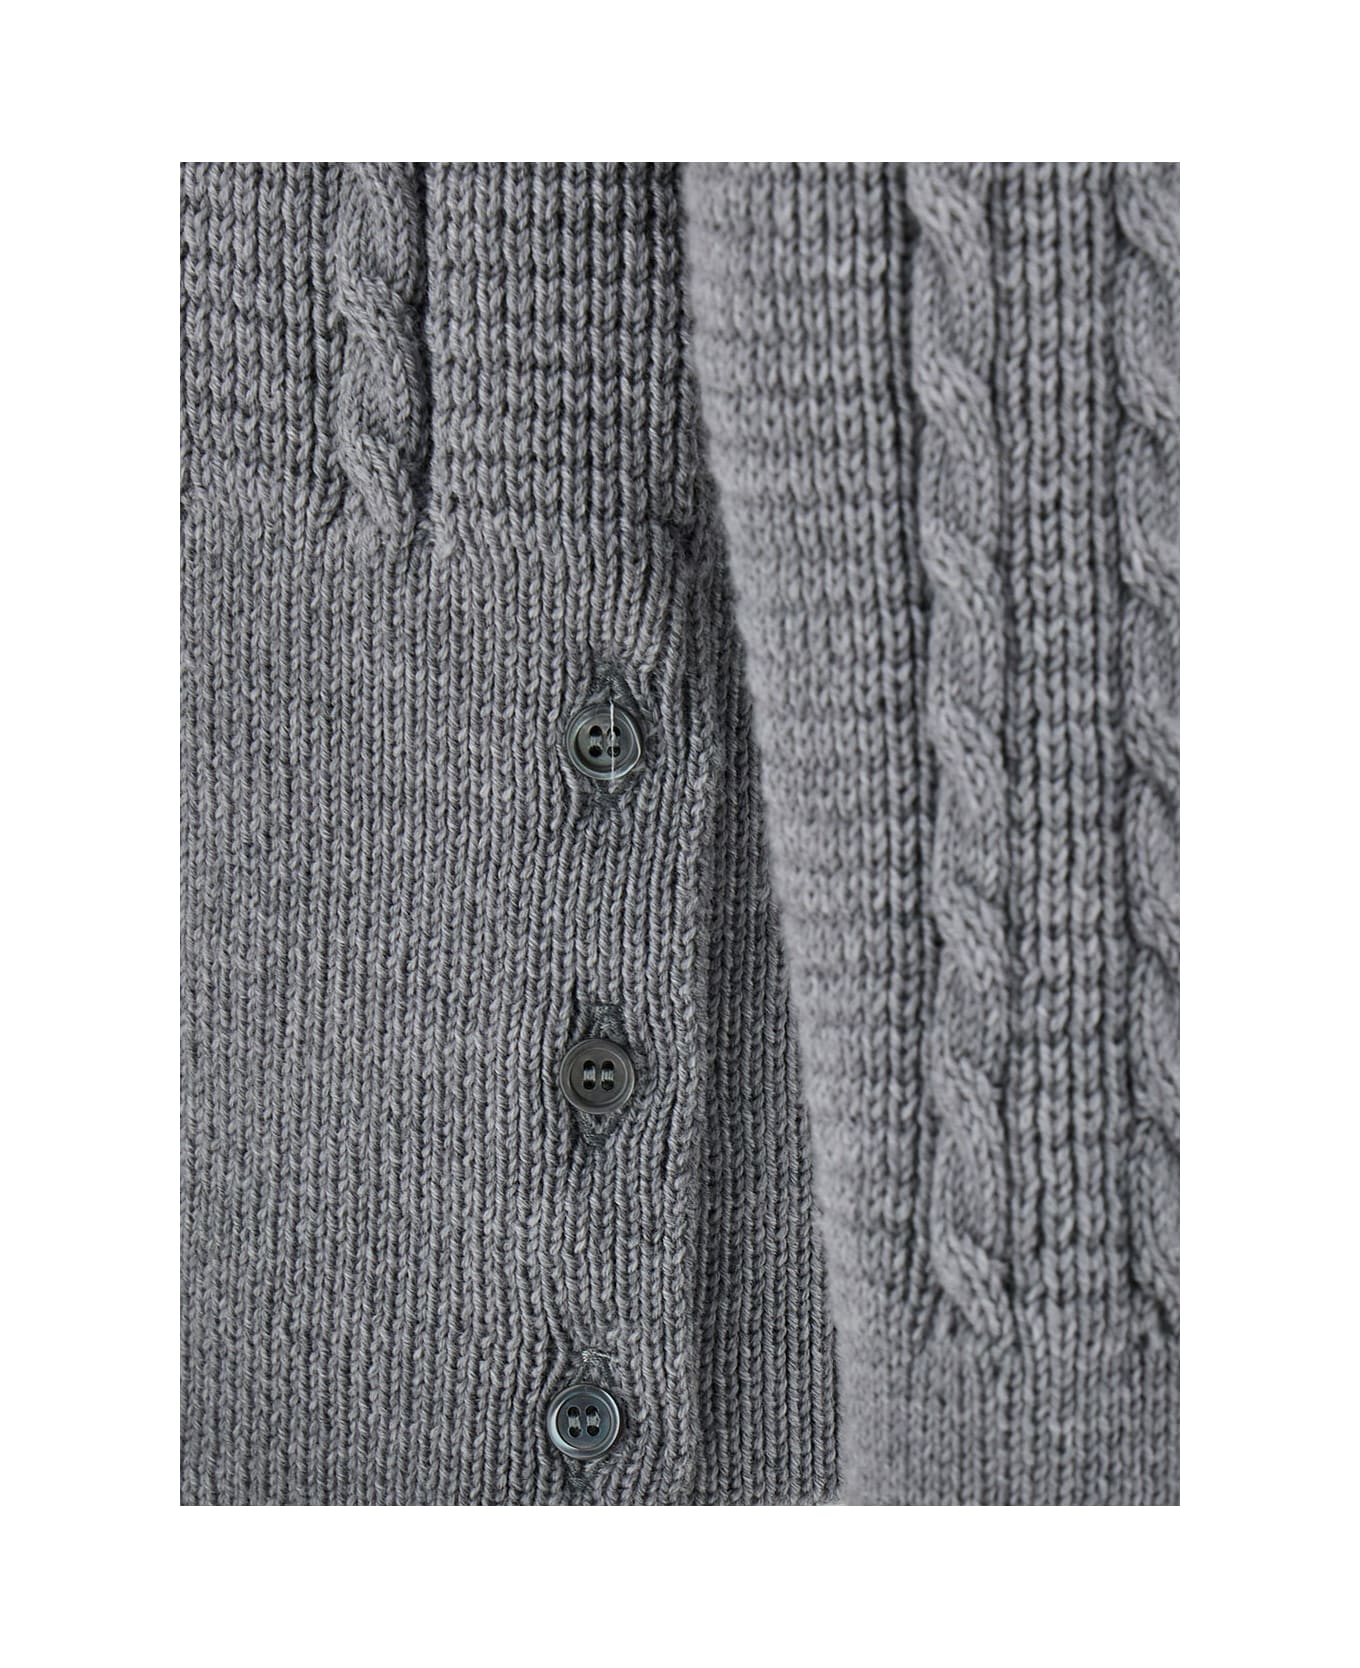 Thom Browne 'cable' Sweater - Lt Grey